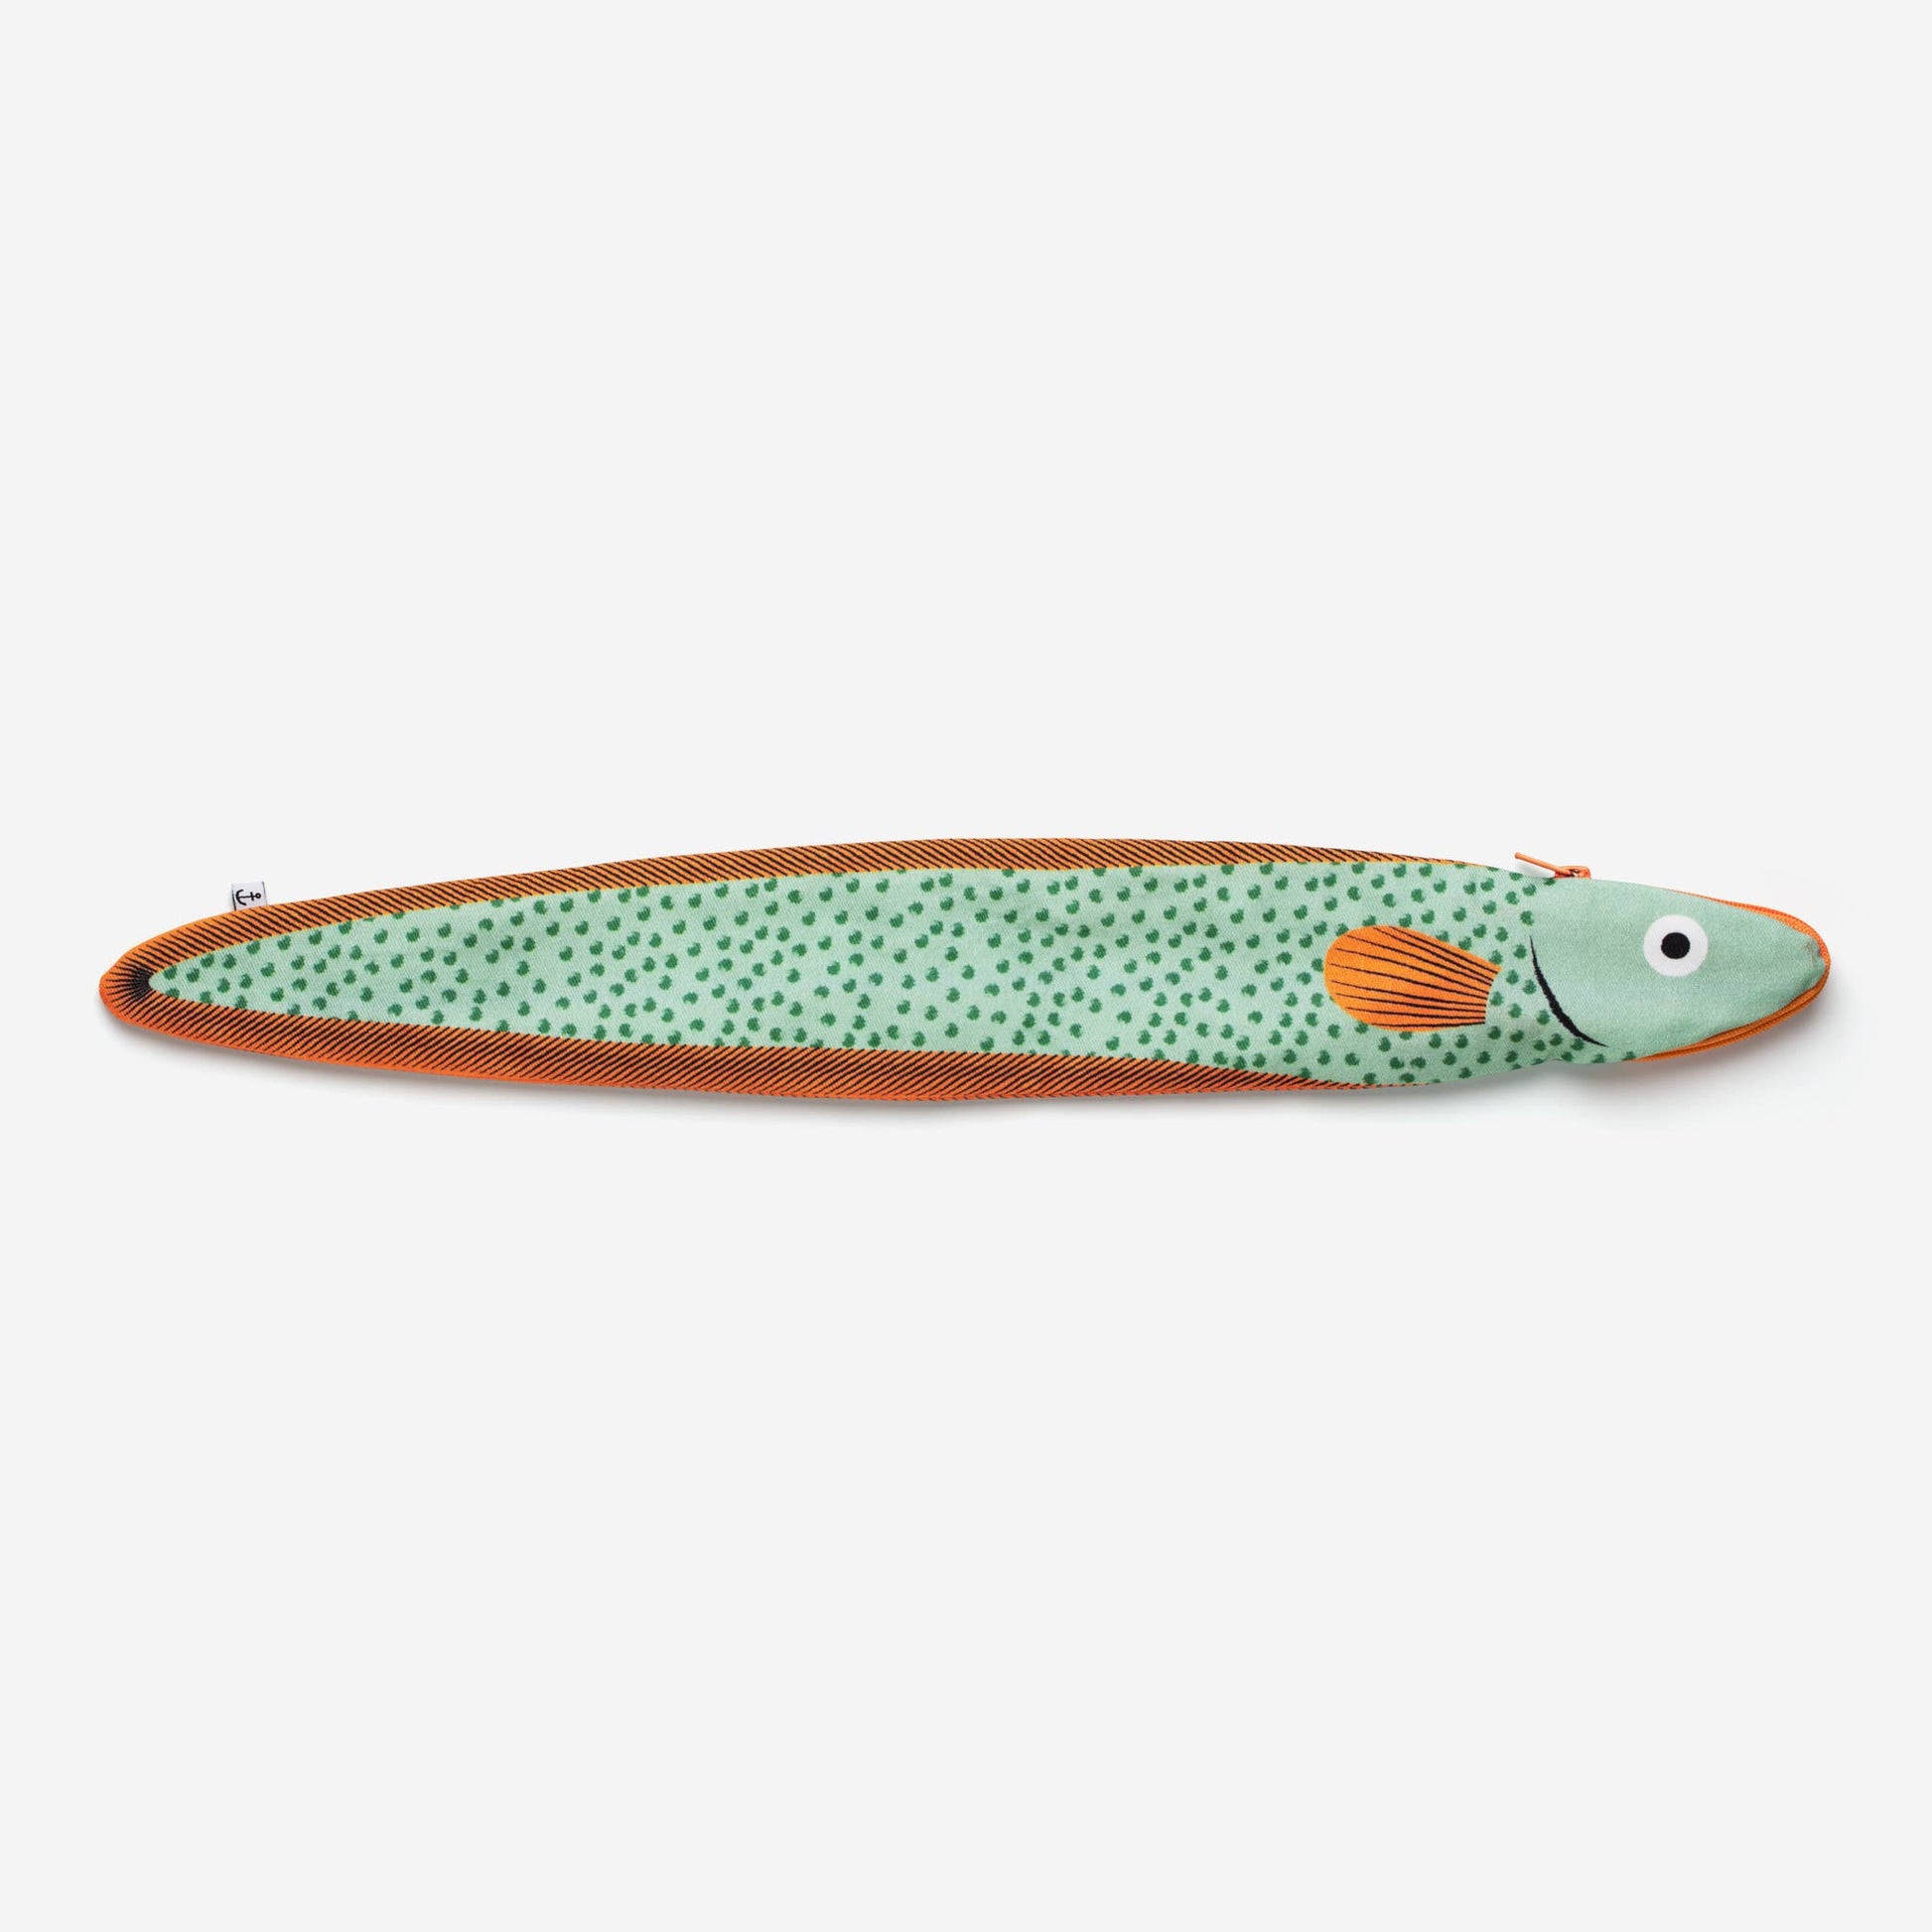 Eel pouch for knitting needles -- mint blue with darker small spots and orange edges and fin